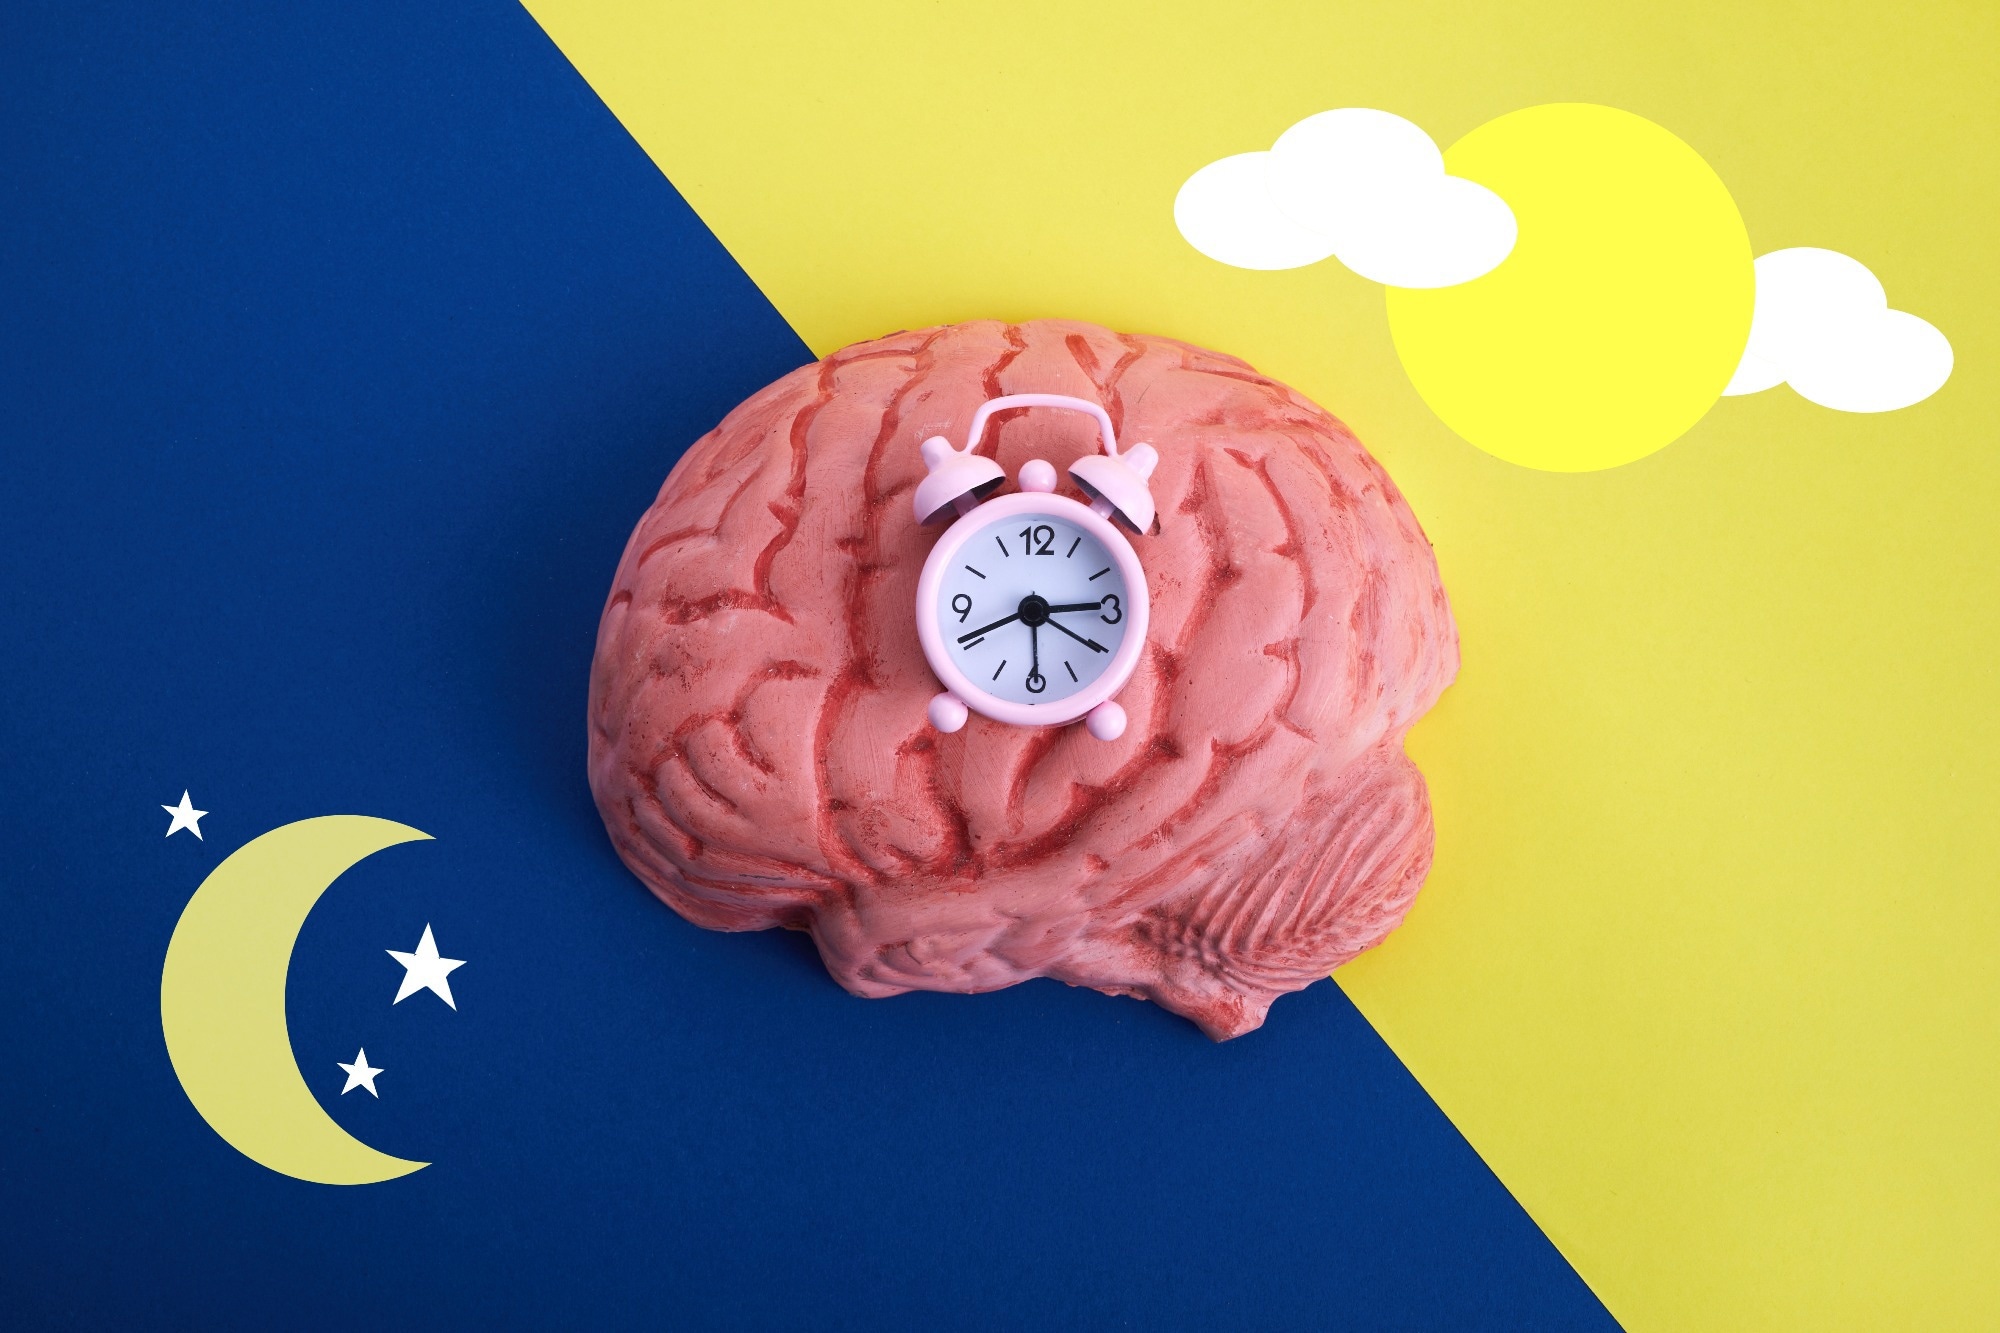 Study: Effect of circadian disruption on the hypothalamic control of reproduction in female mice. Image Credit: vetre / Shutterstock